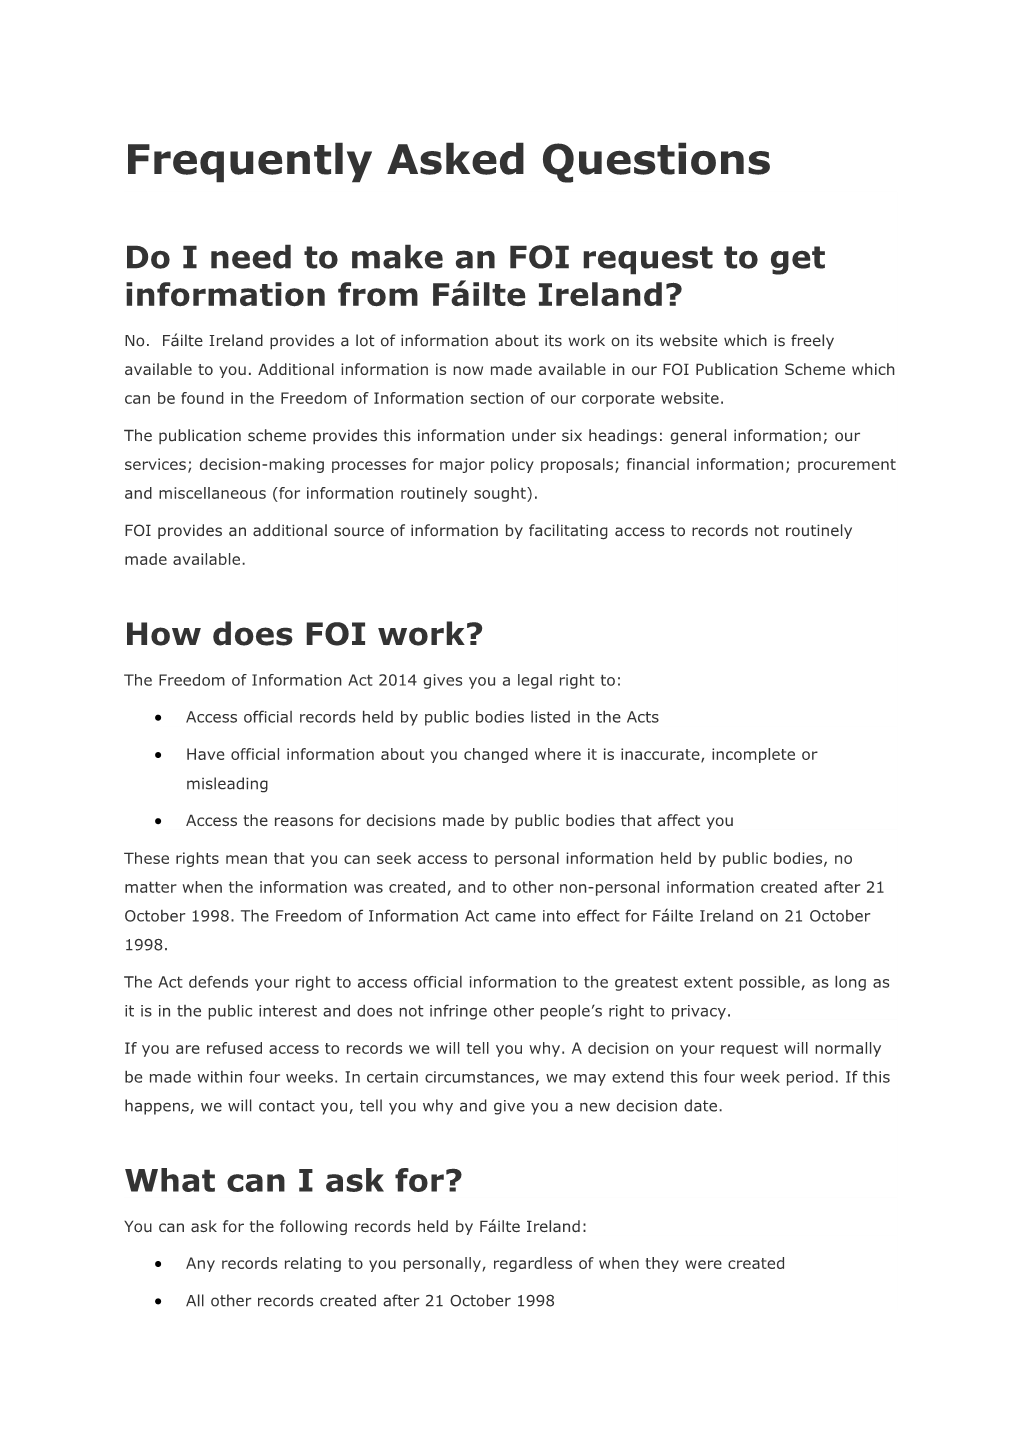 Do I Need to Make an FOI Request to Get Information from Fáilte Ireland?